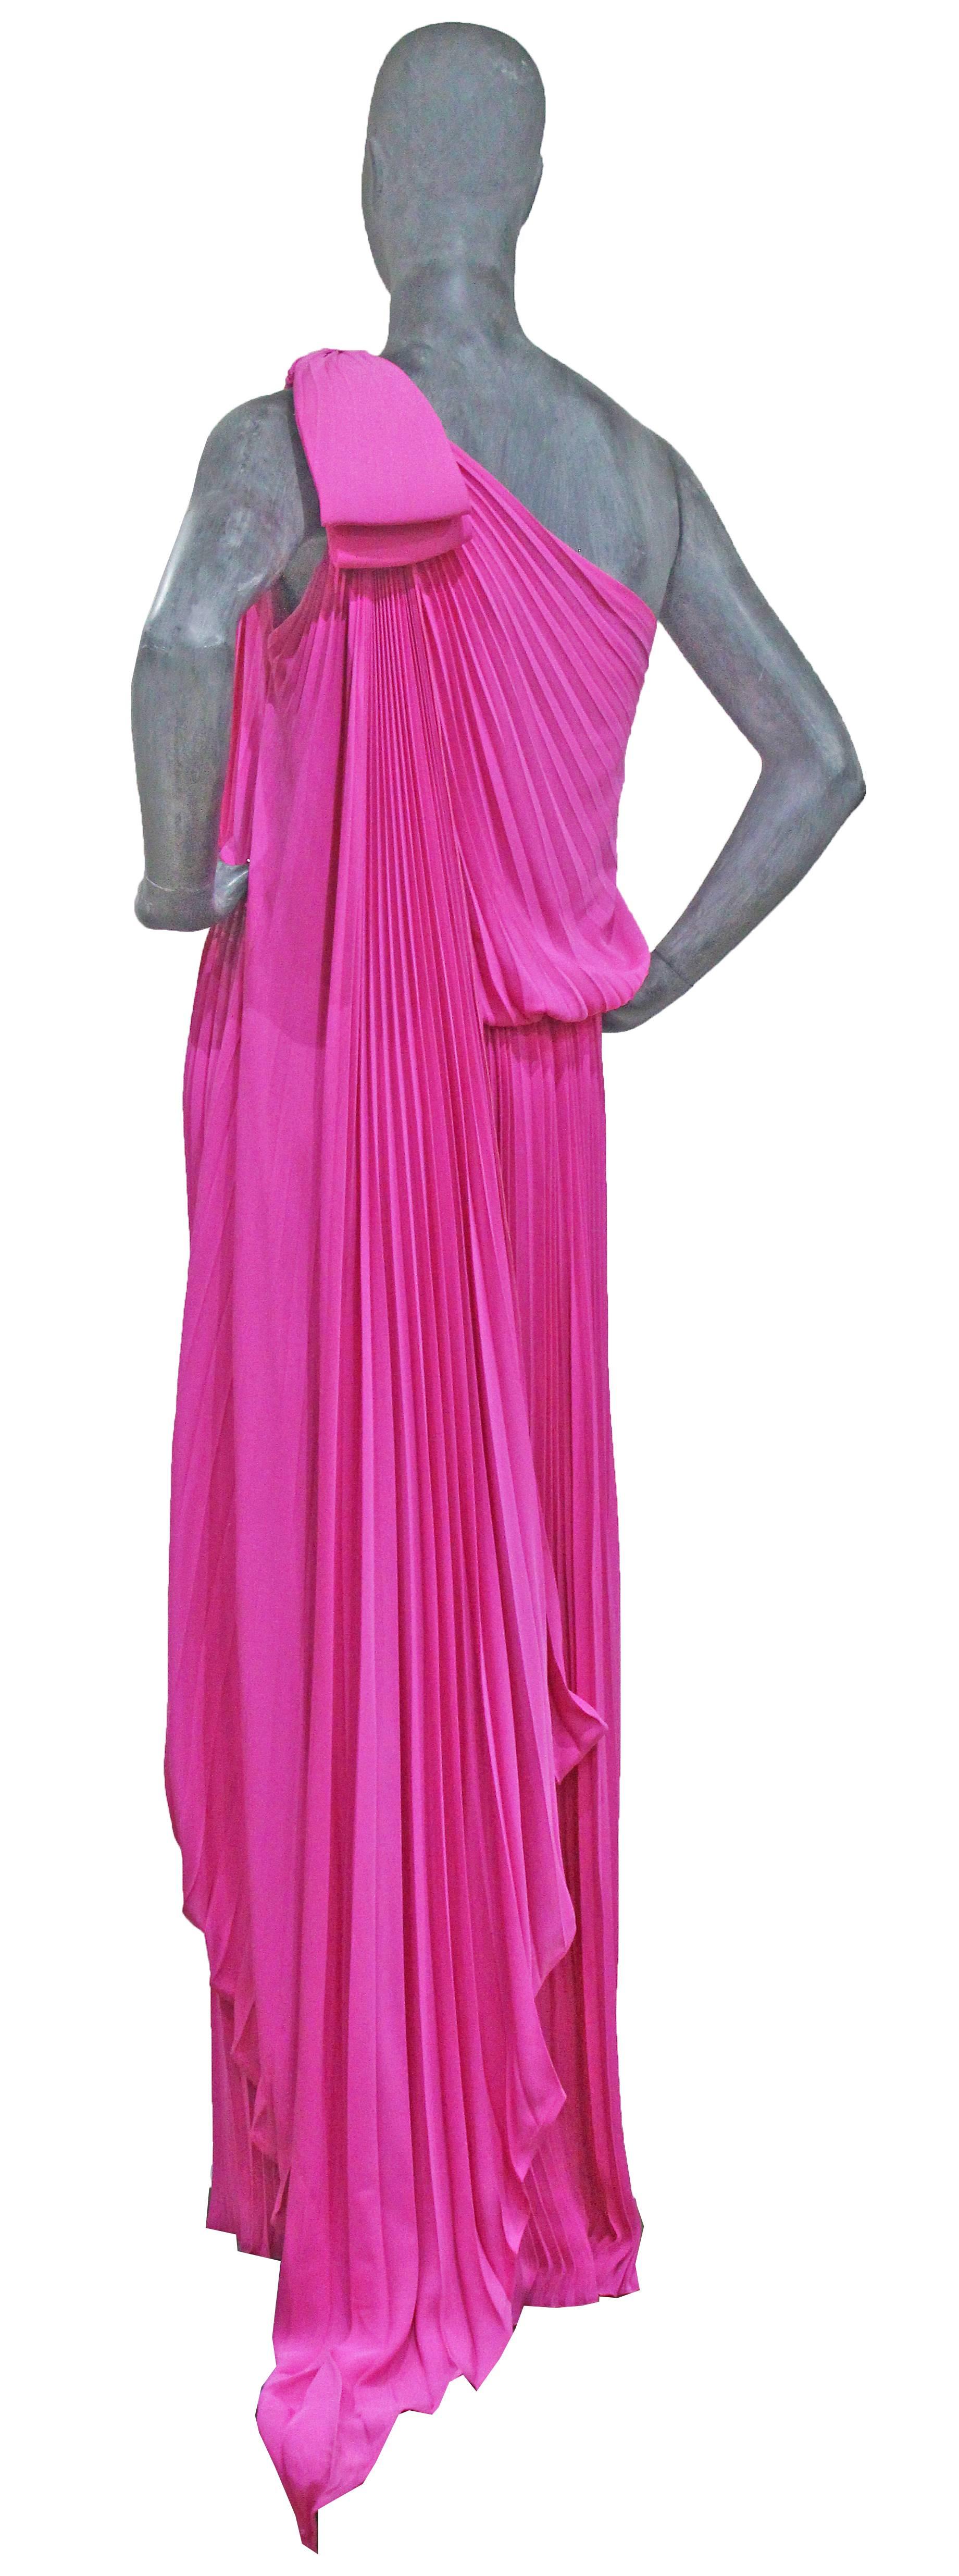 pierre cardin evening dress in shell pink silk with irridescent pailletes